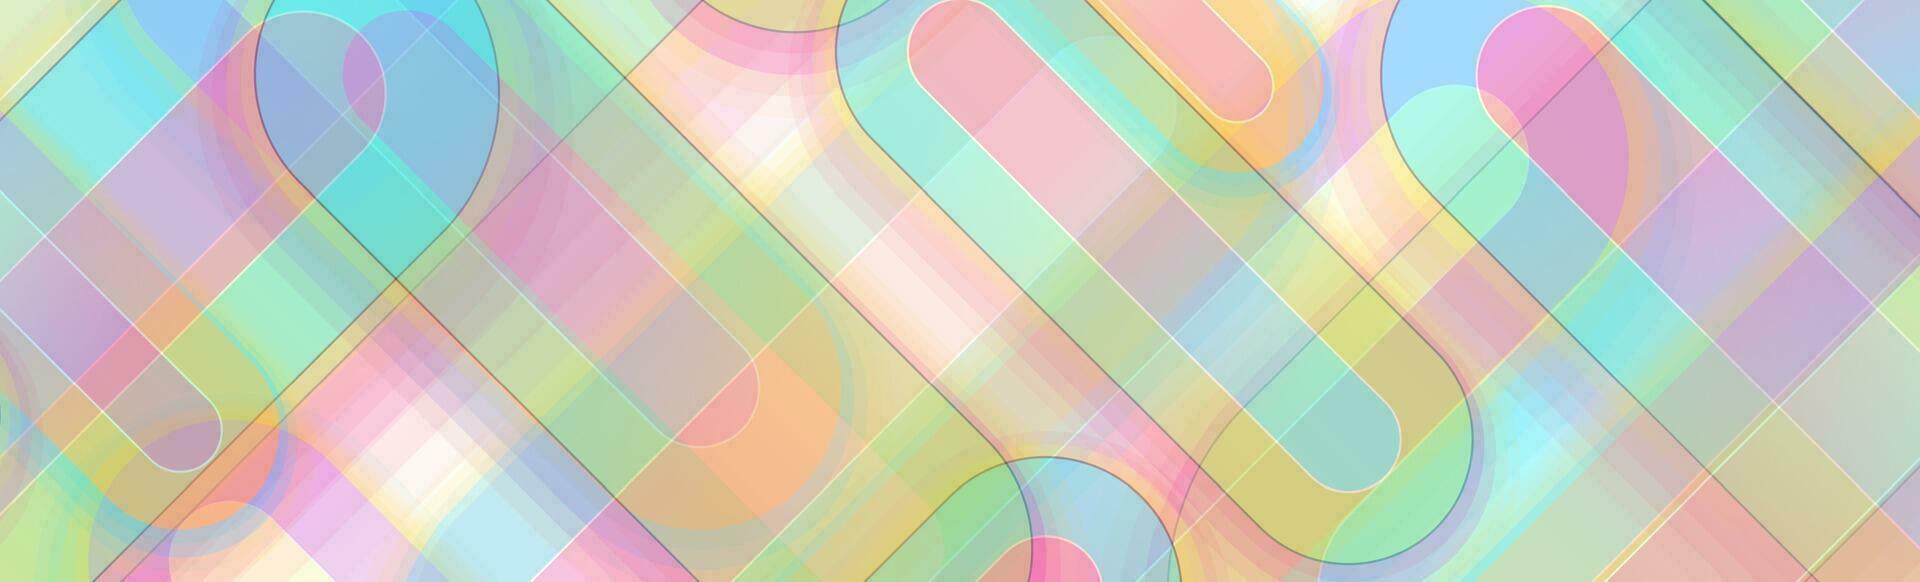 Colorful pastel geometric abstract background vector